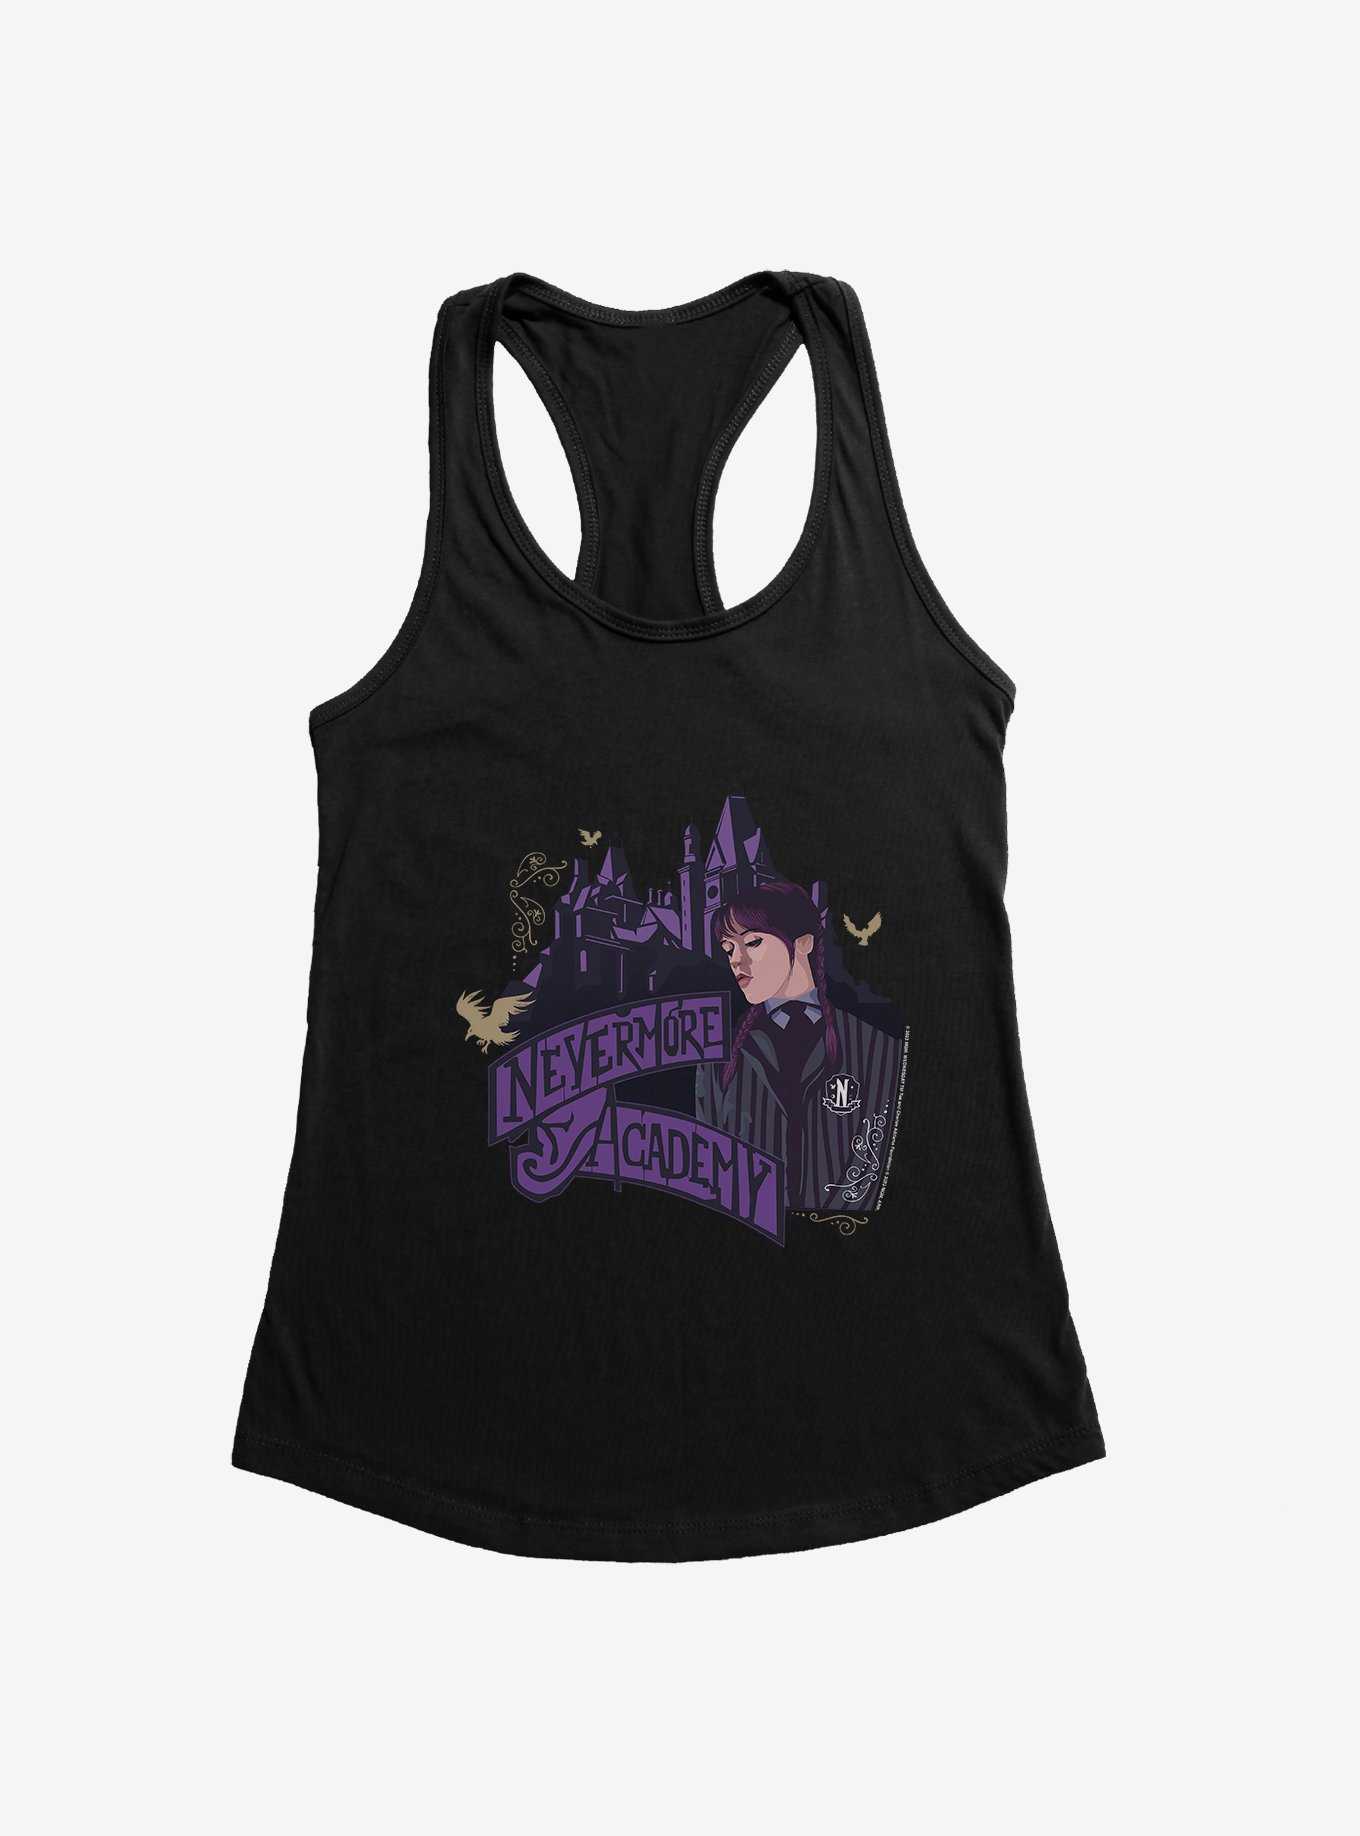 Wednesday Nevermore Academy Building Girls Tank, , hi-res